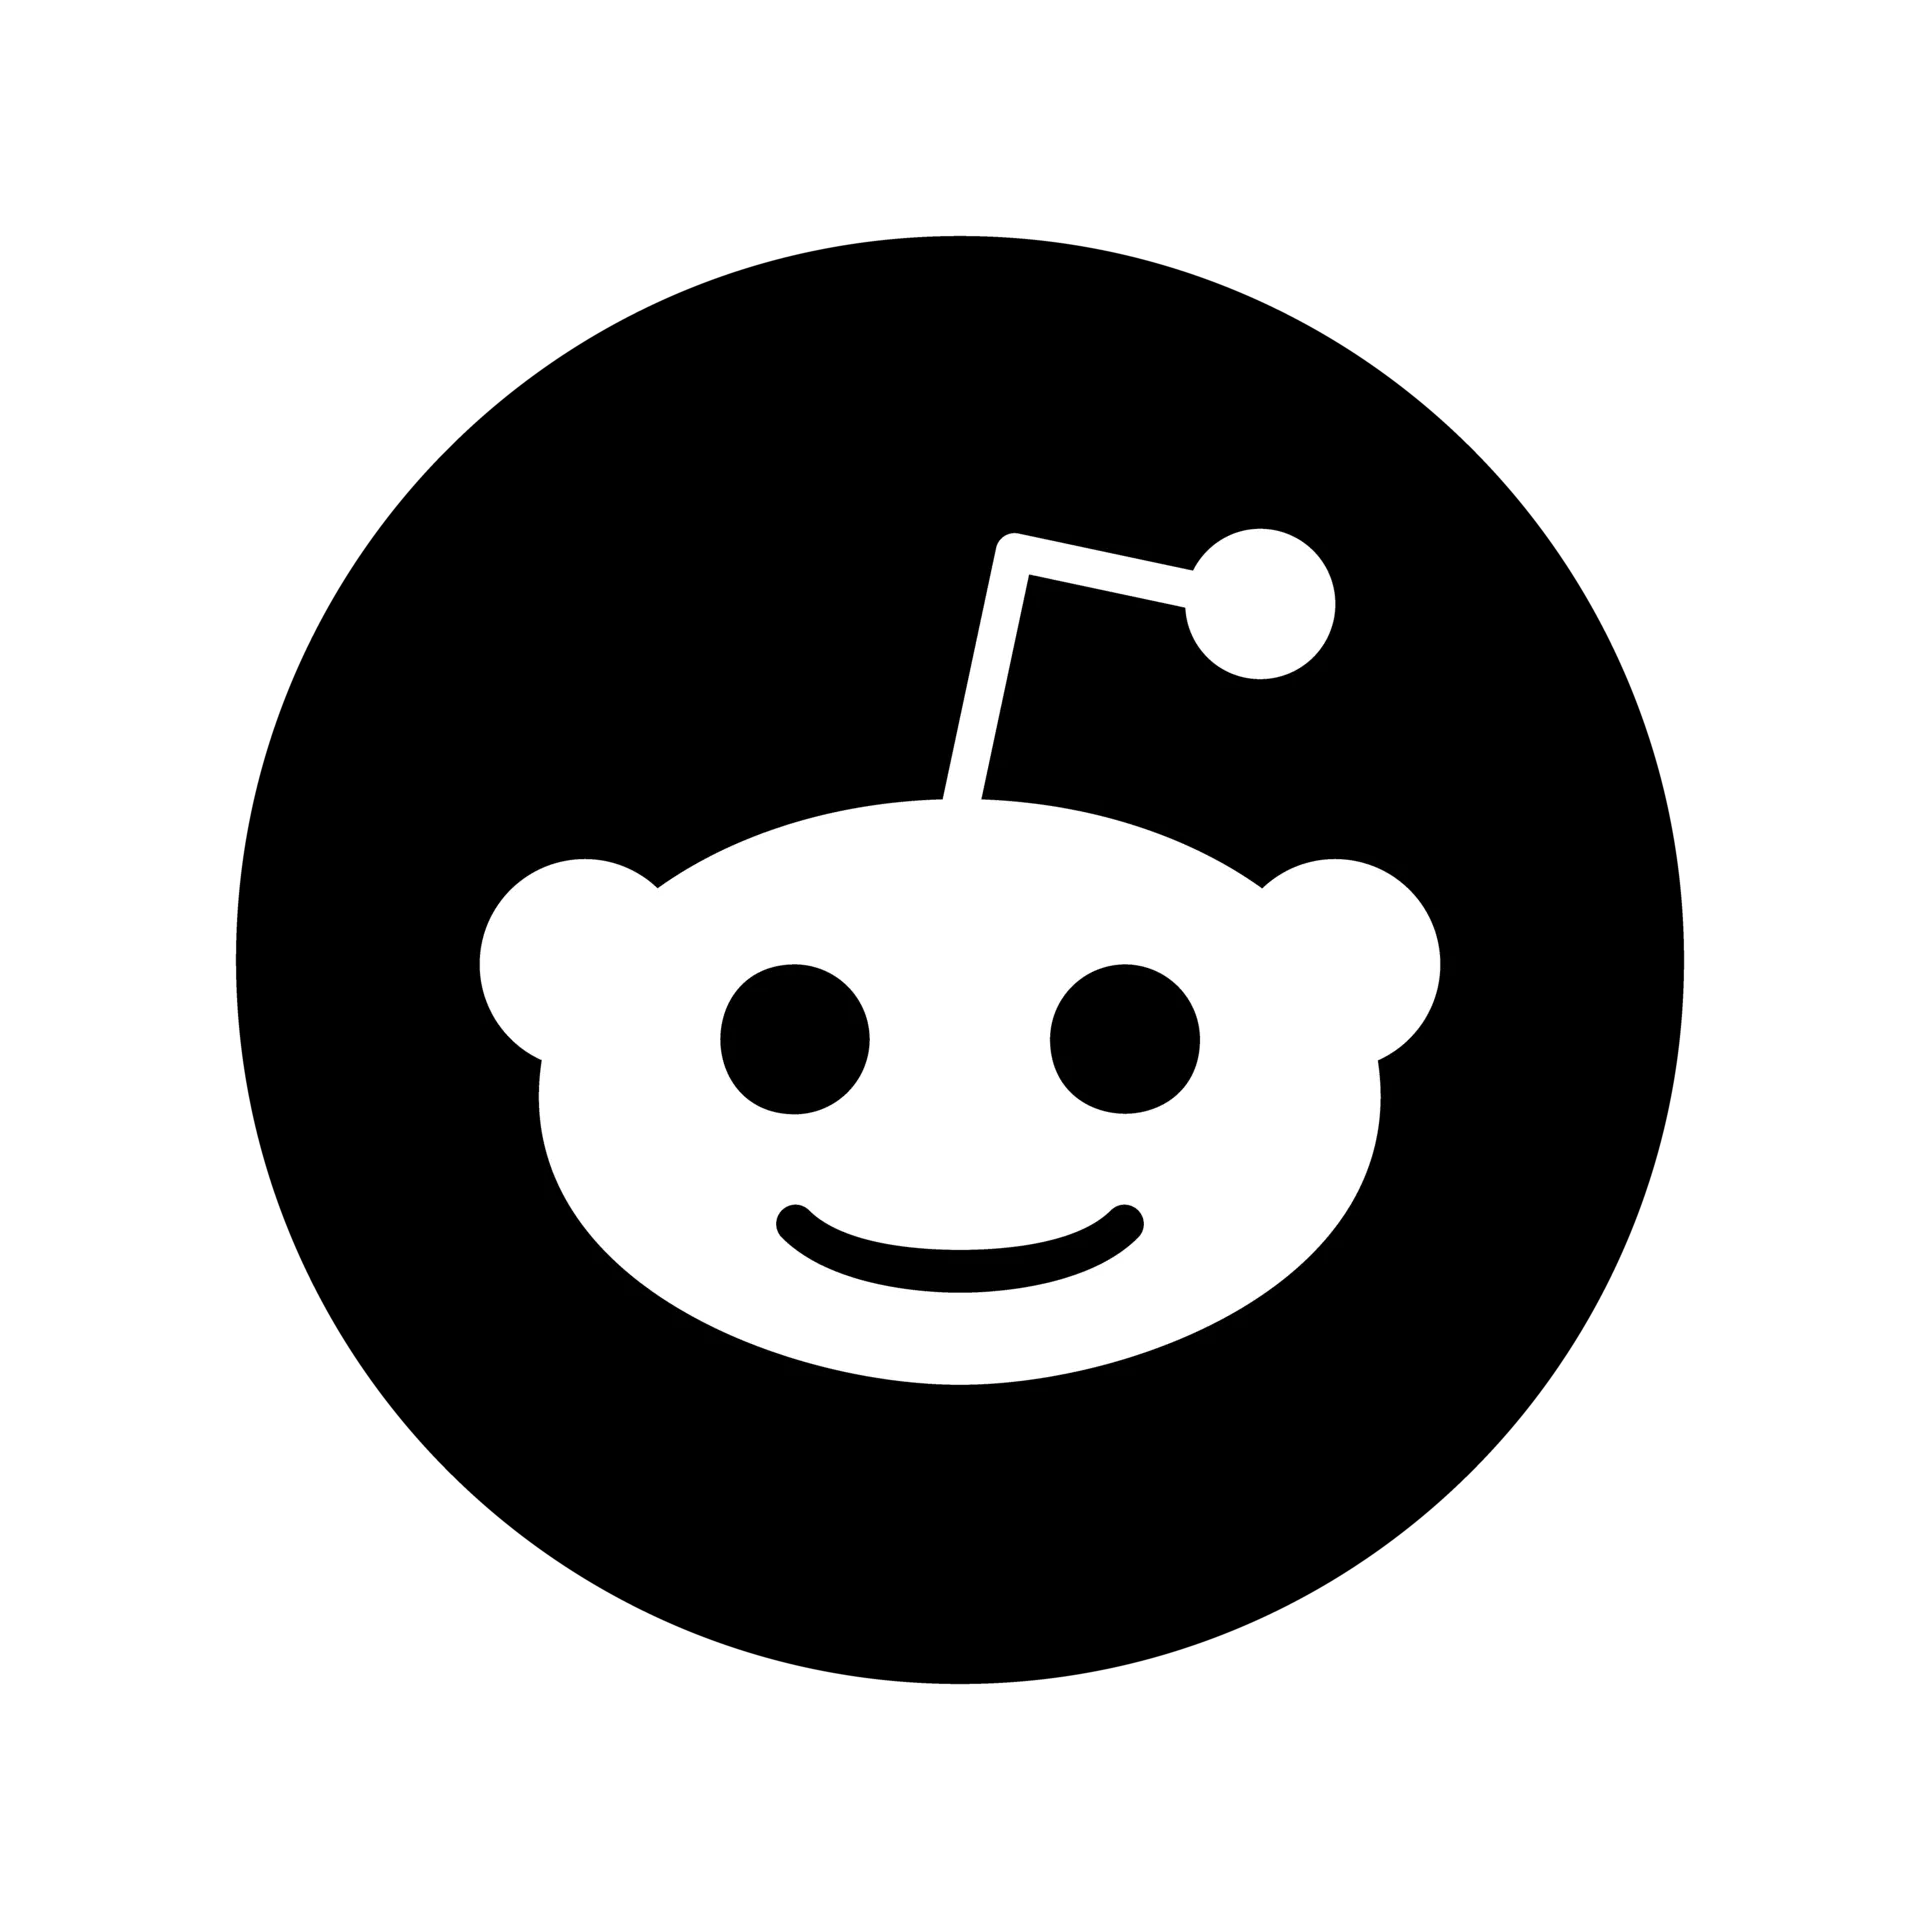 The community-building content champion making Reddit part of your mix